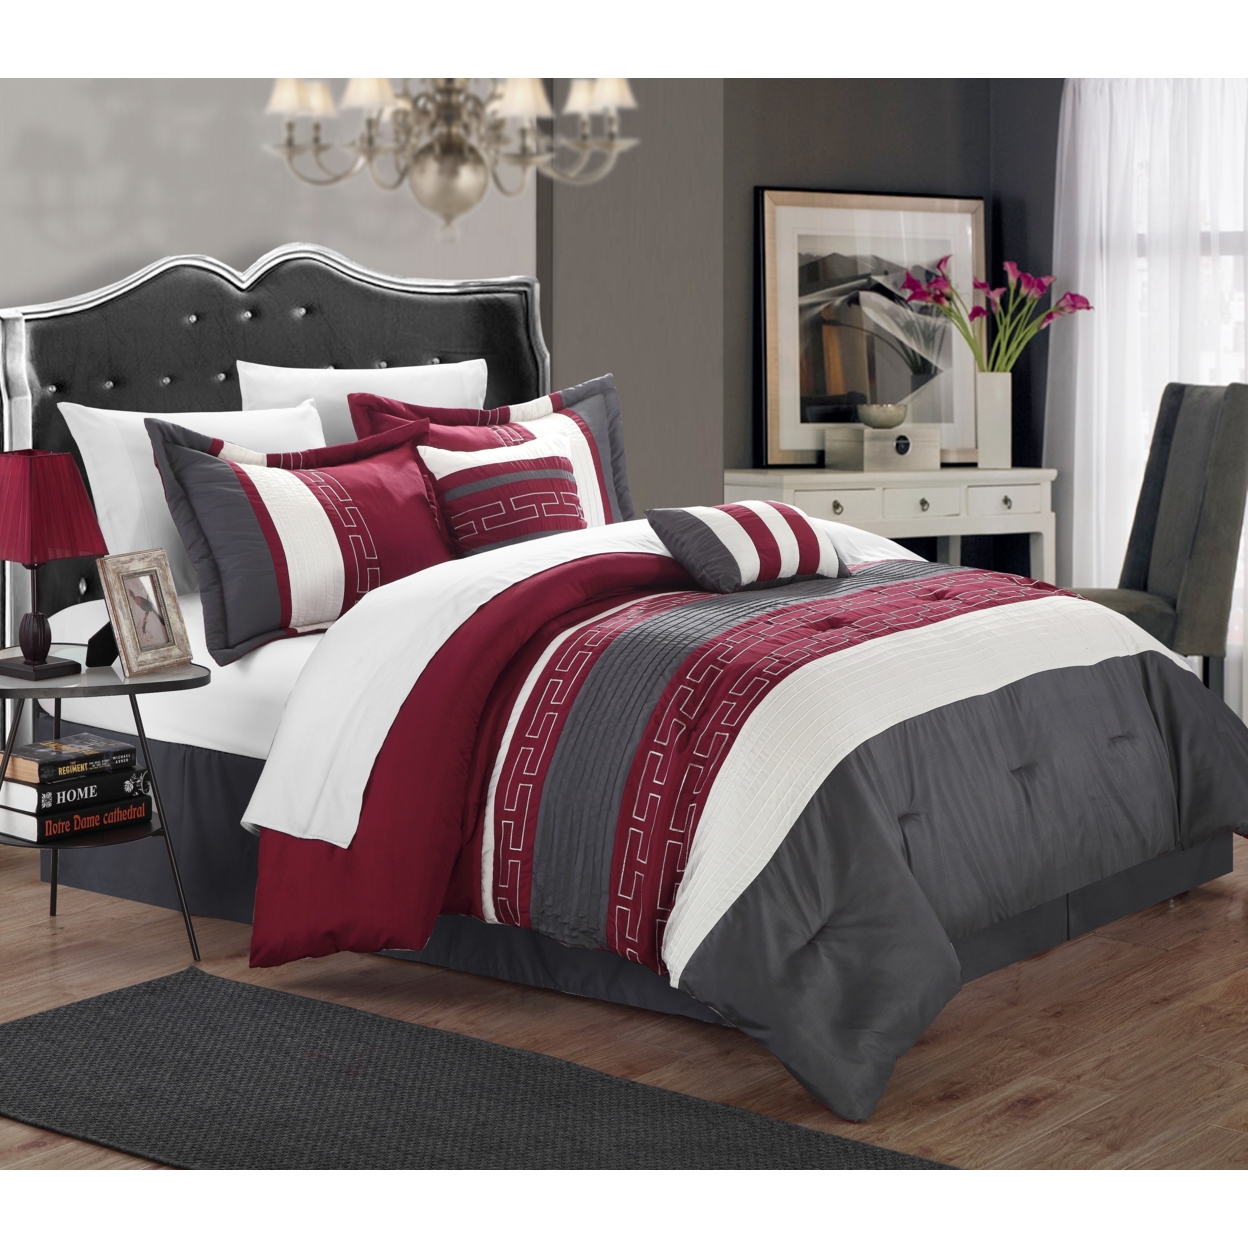 Chic Home Coralie 6-piece Comforter Set Hotel Collection - Burgundy, Queen